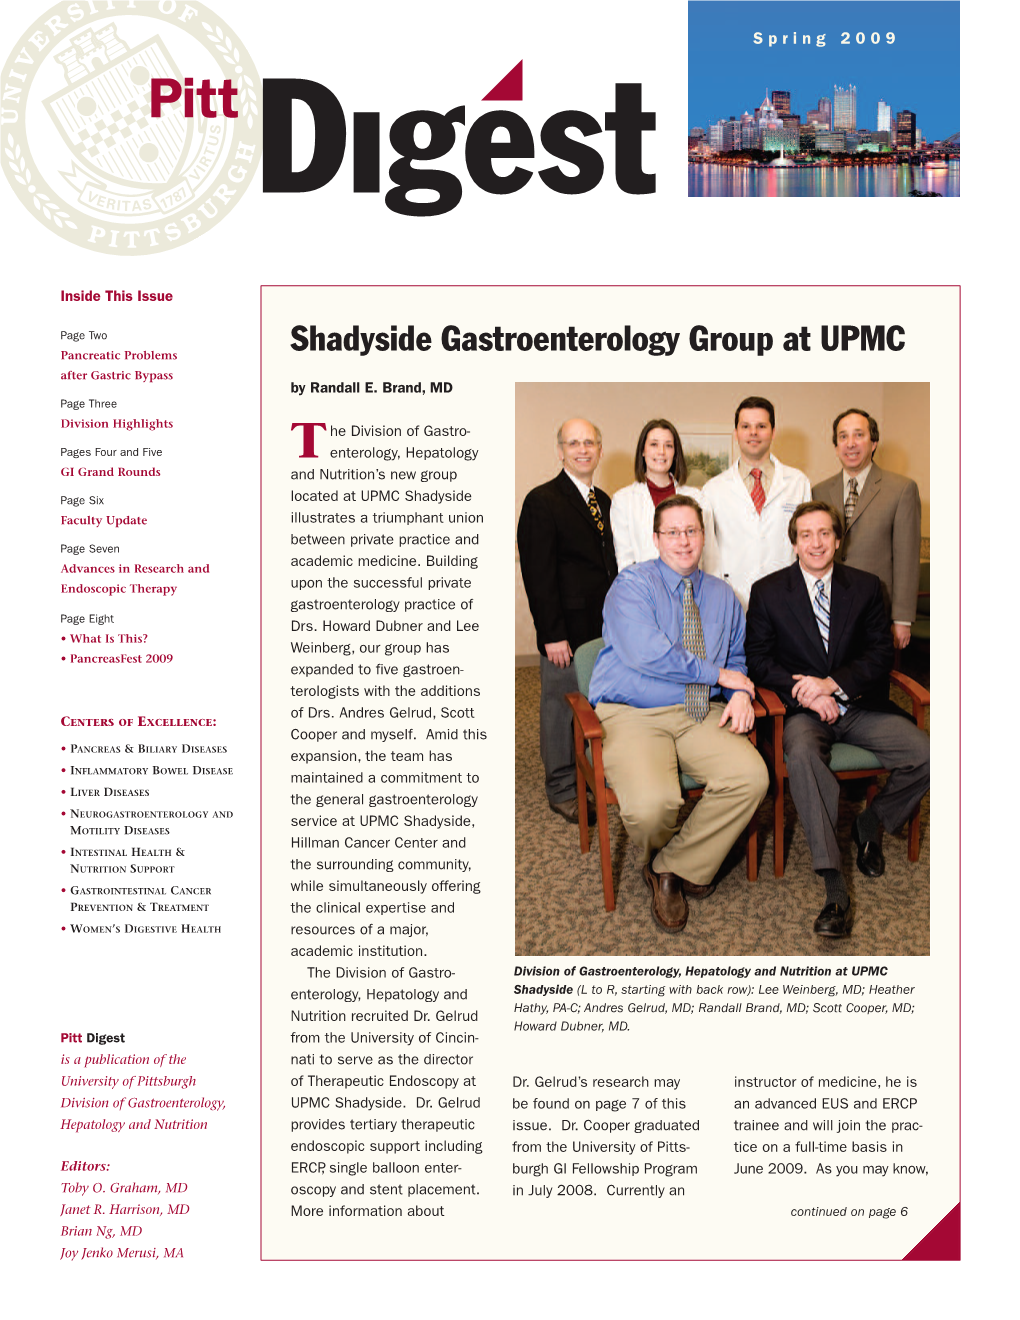 Shadyside Gastroenterology Group at UPMC Pancreatic Problems After Gastric Bypass by Randall E